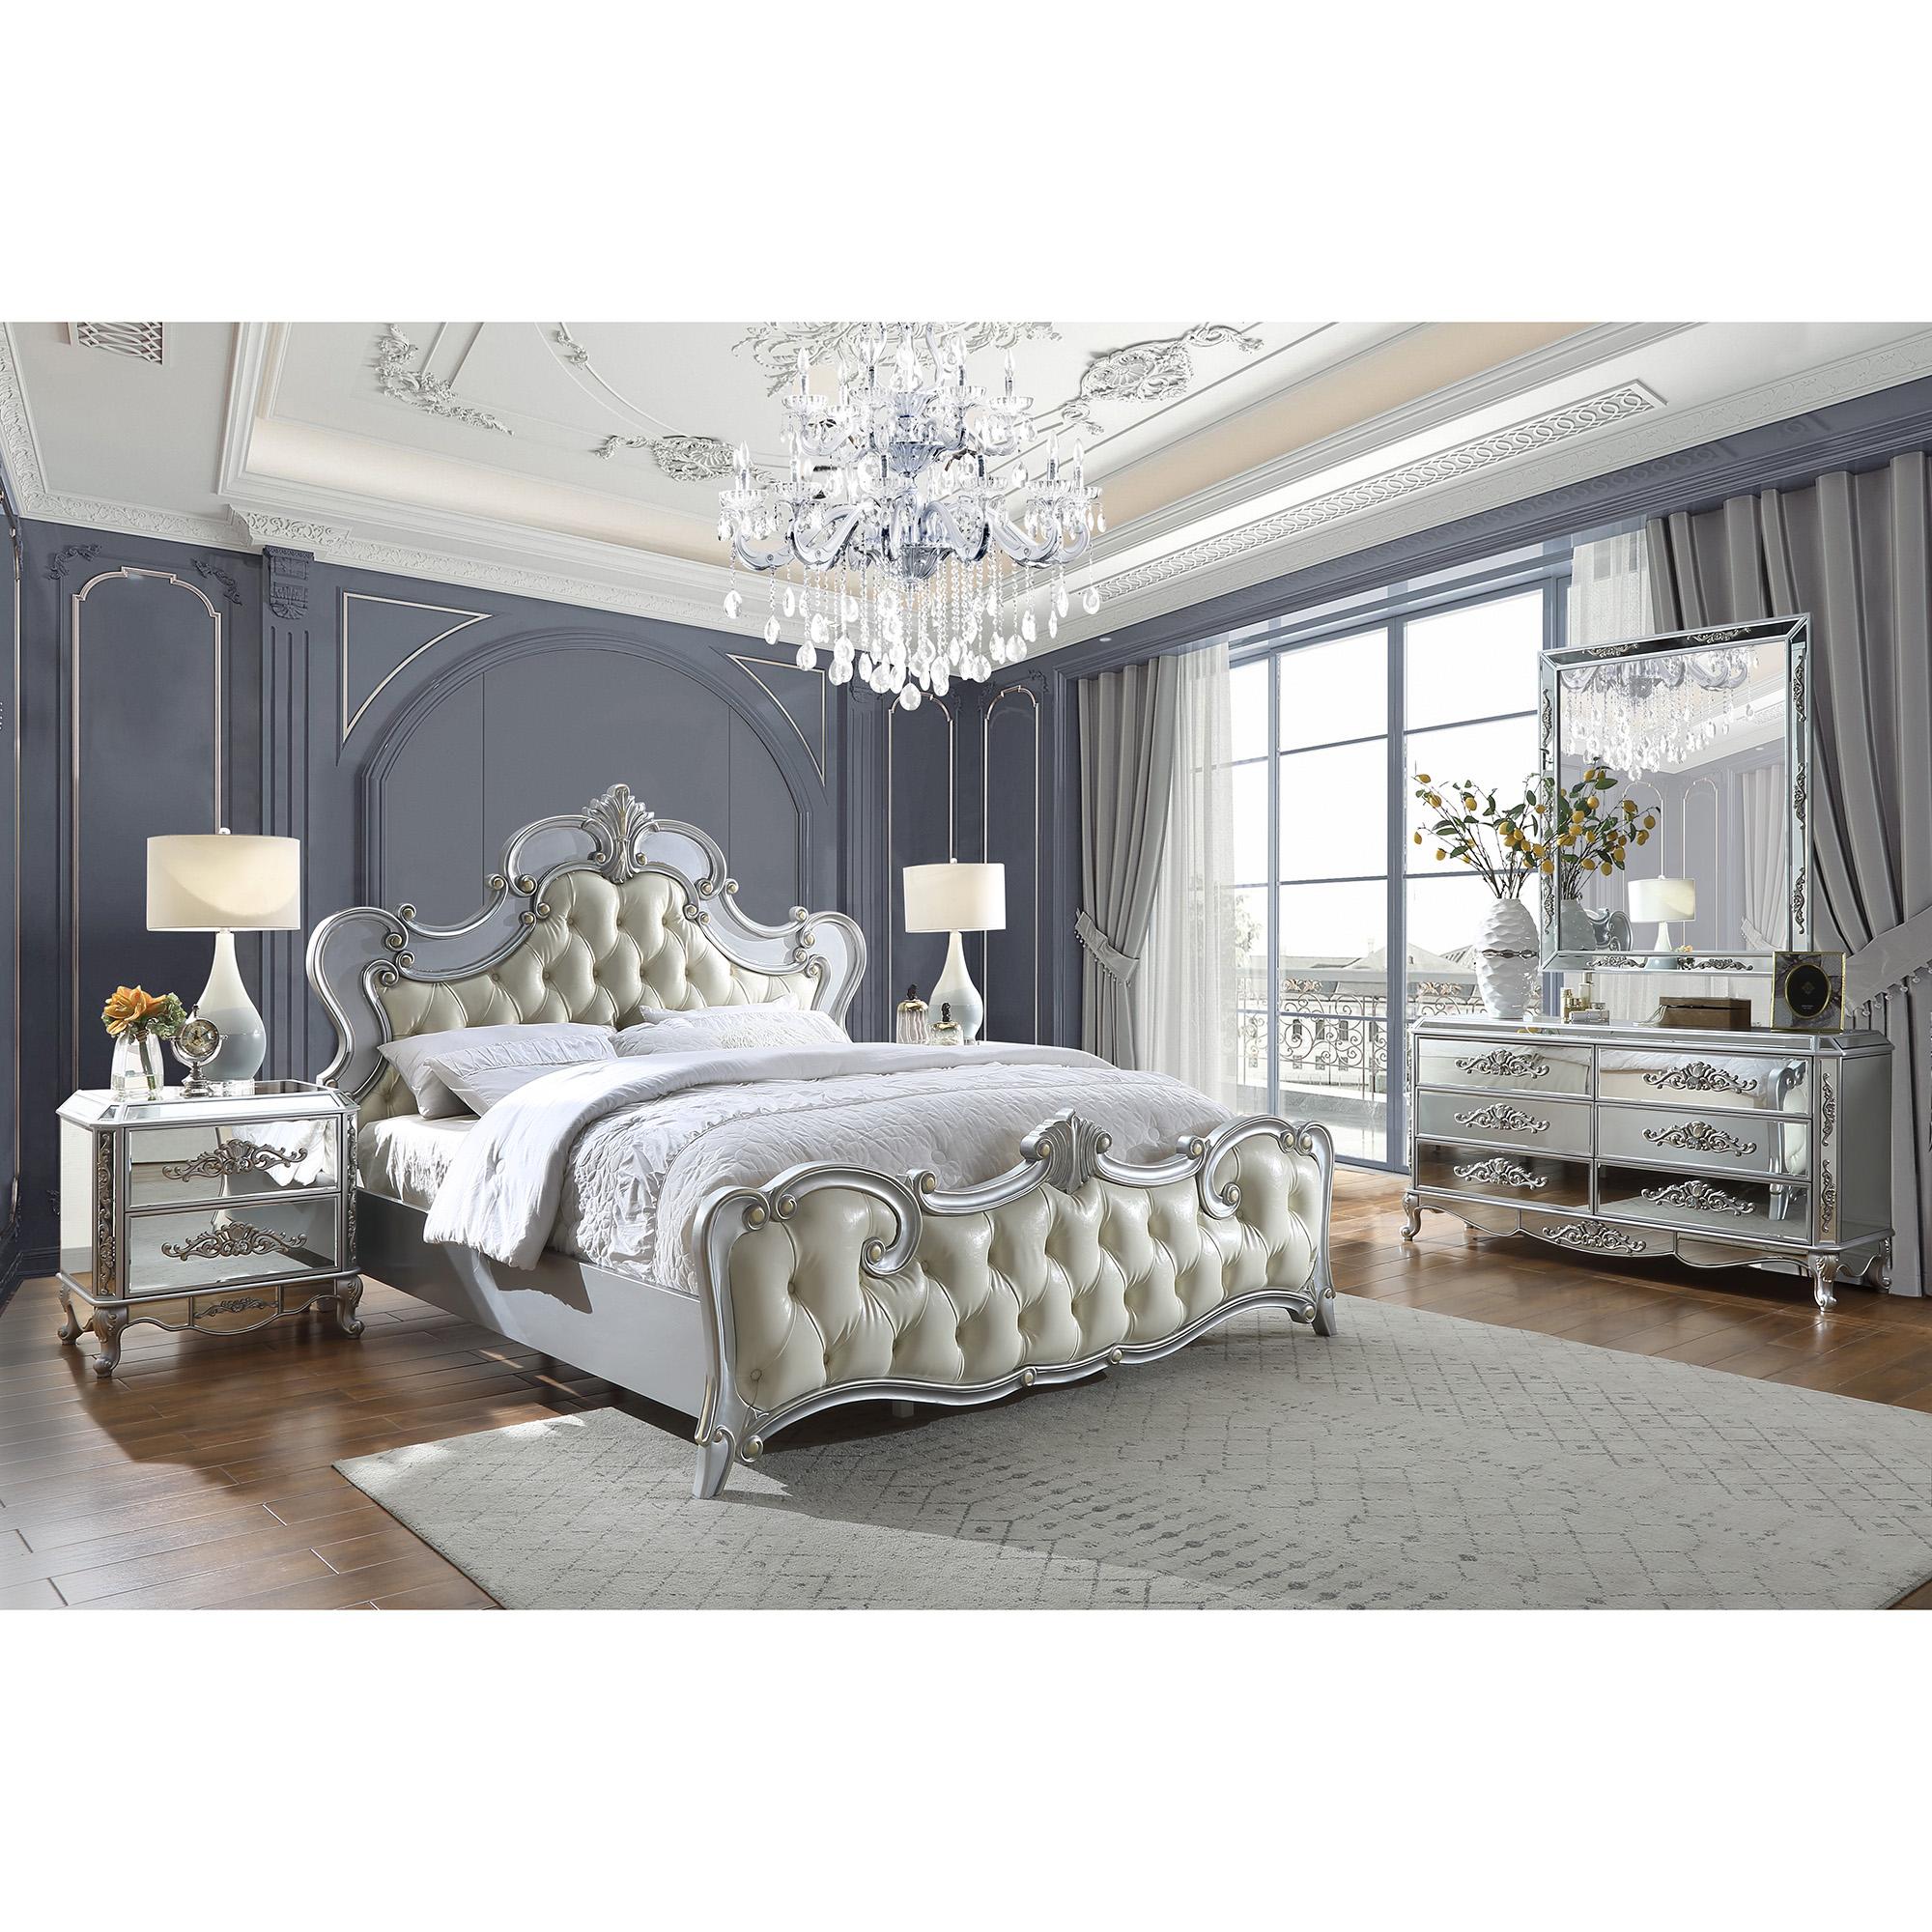 Traditional Panel Bedroom Set HD-6036 HD-EK6036-5PC-BEDROOM in Antique, Silver Faux Leather